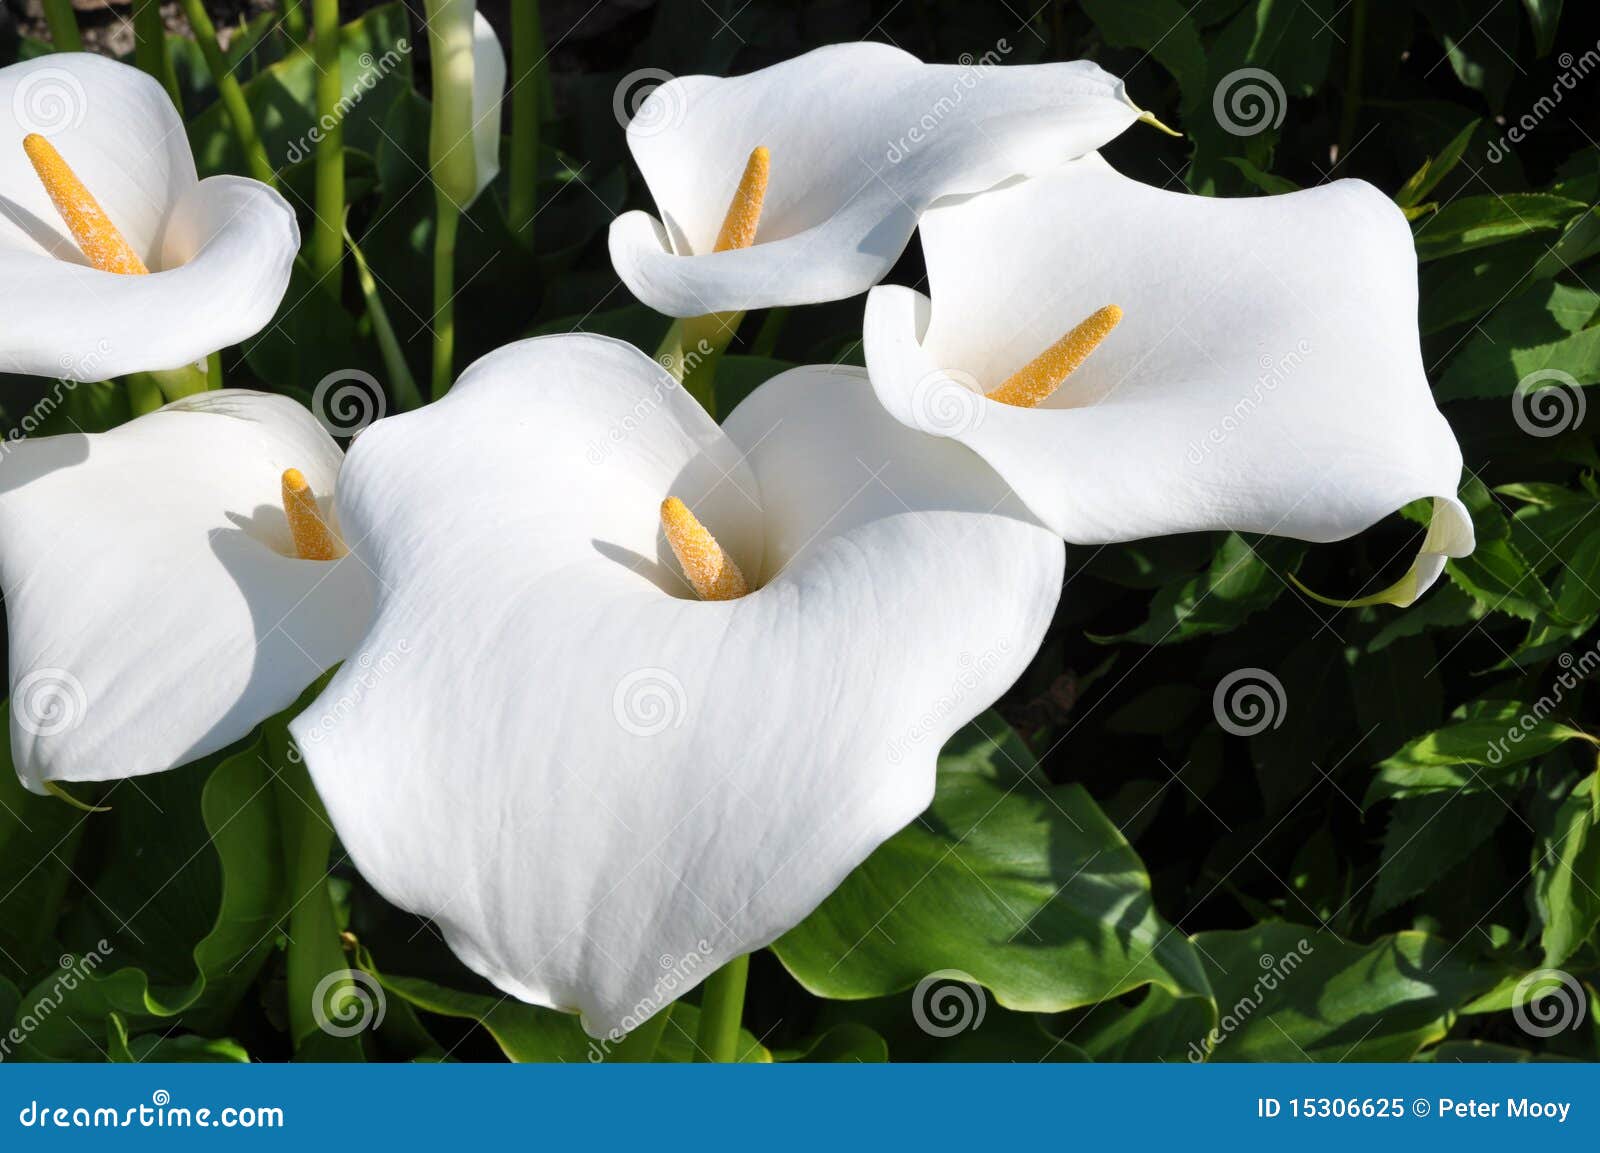 Arum Lilly Group with Yellow Spadix Stock Image - Image of fleshy ...